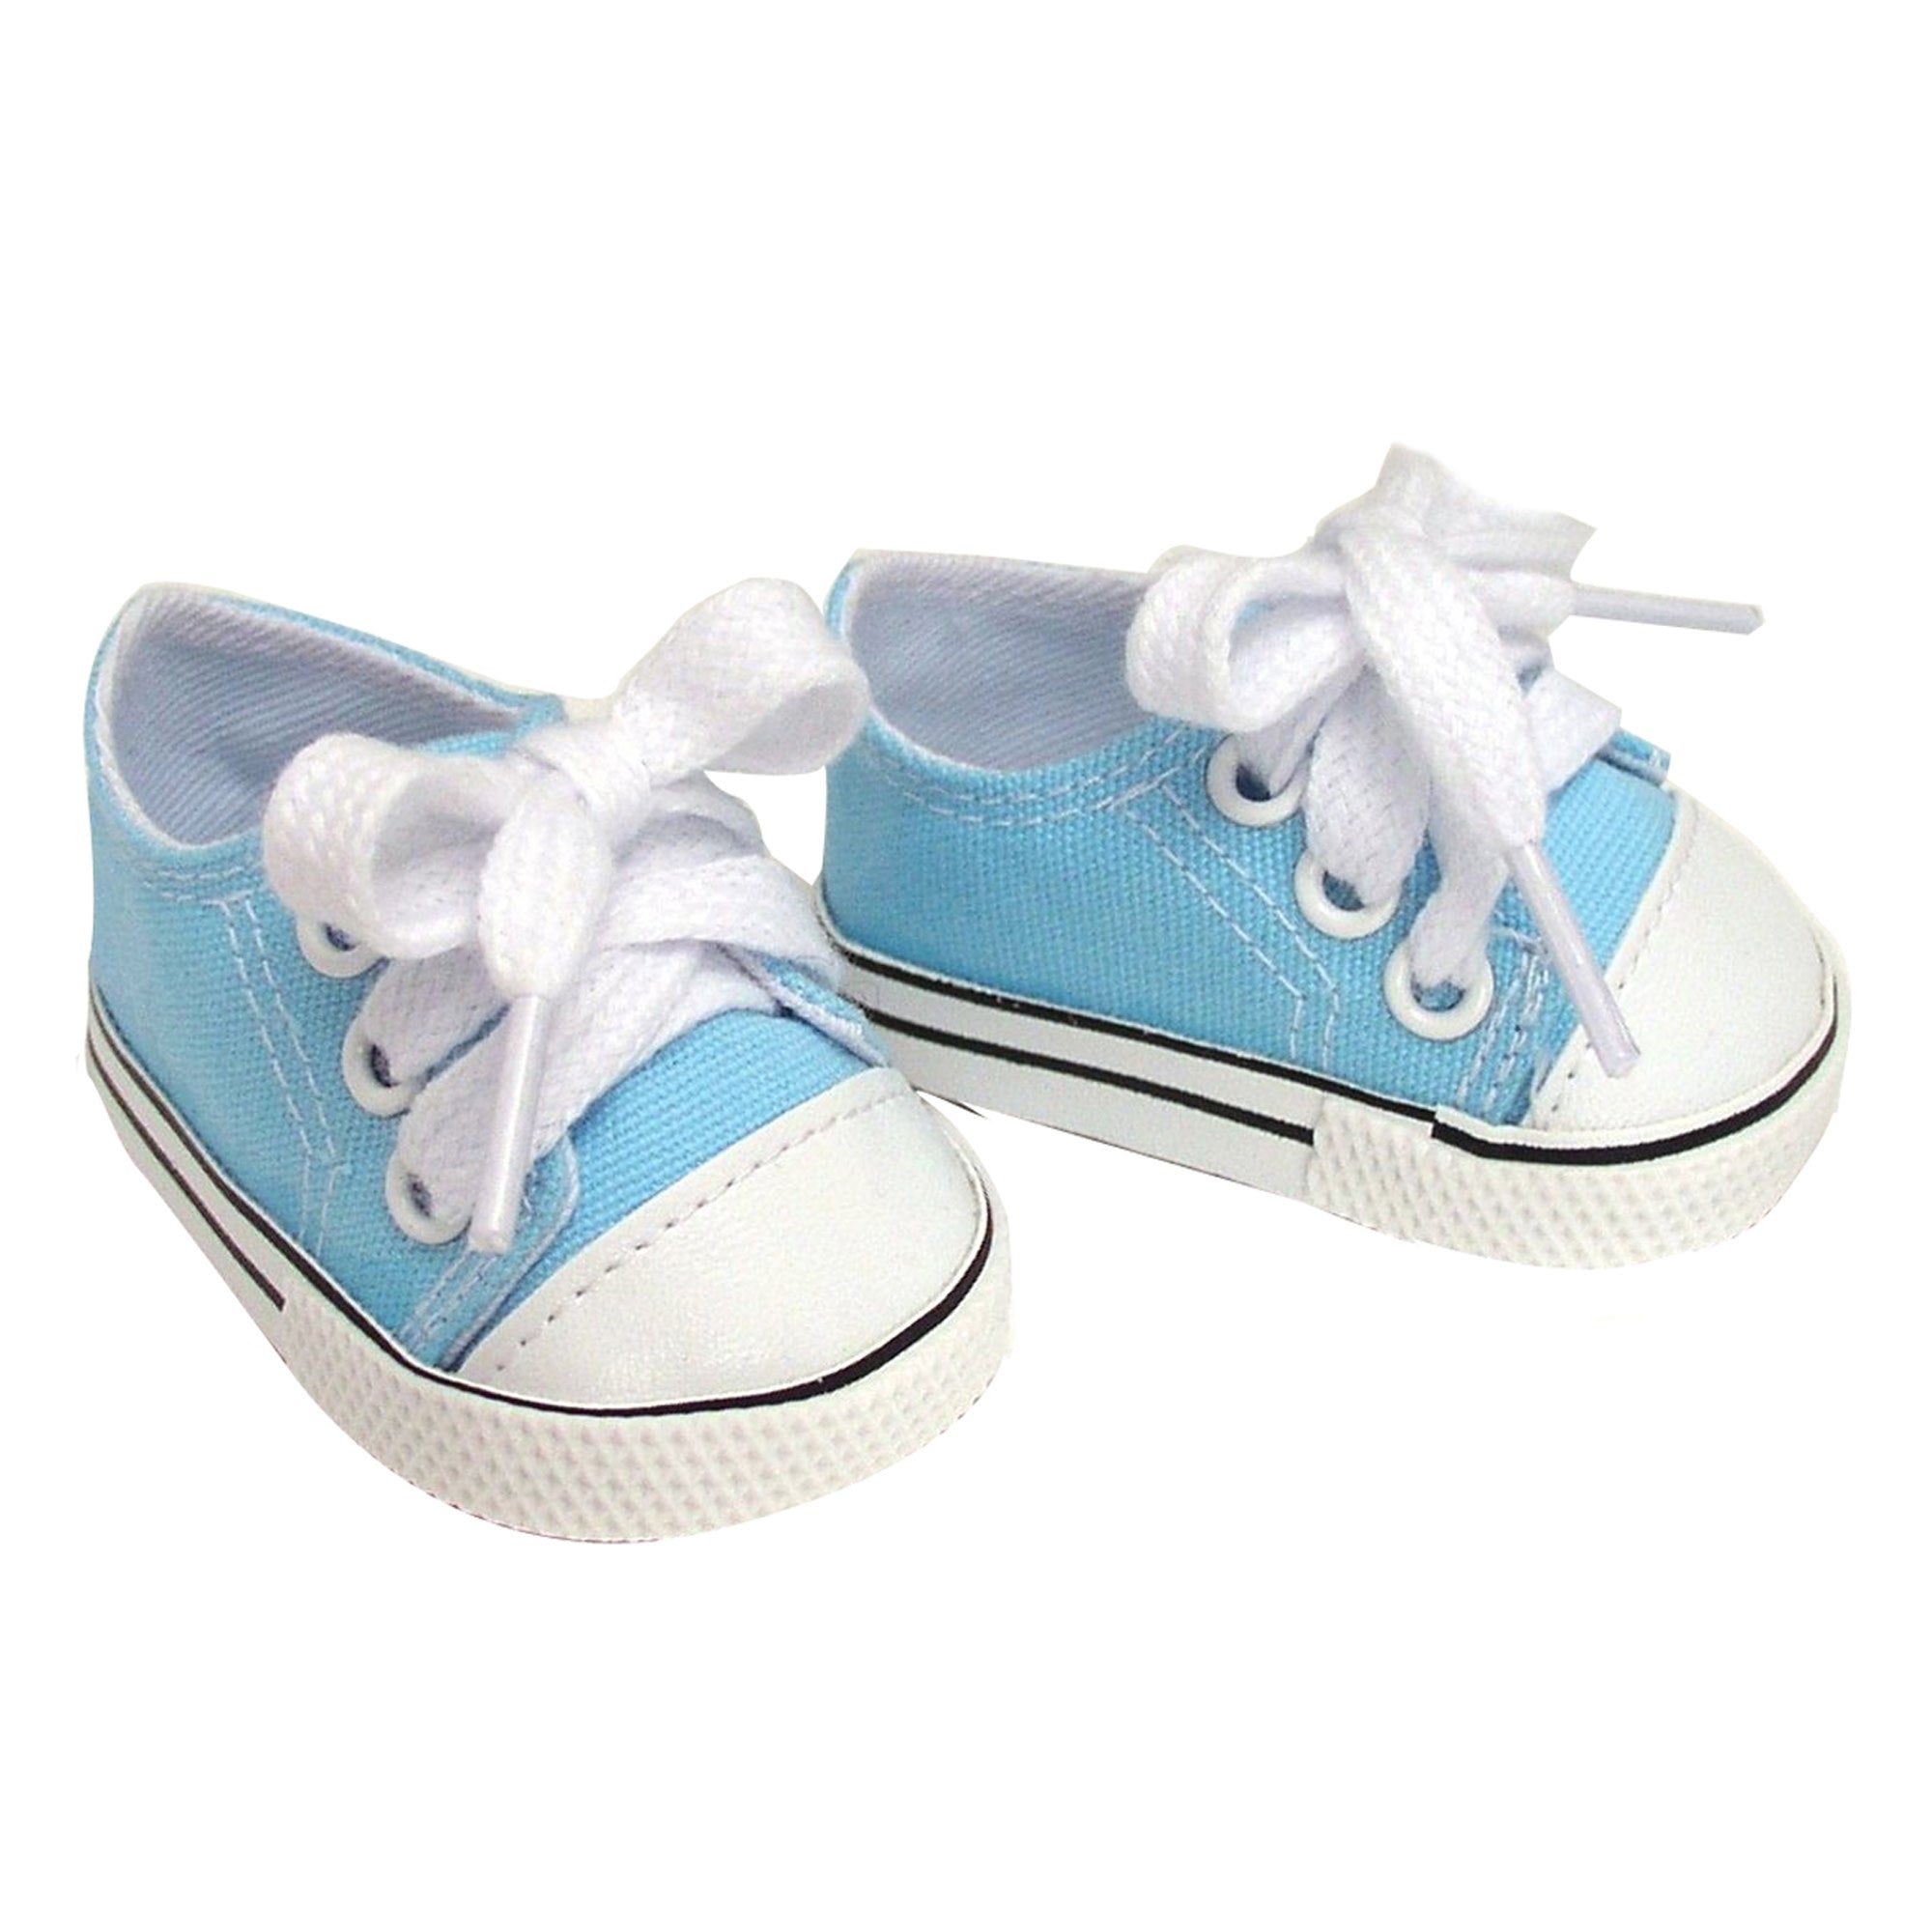 Sophia’s Cute Low-Top Canvas Sneakers for 18” Boy or Girl Dolls, Light Blue